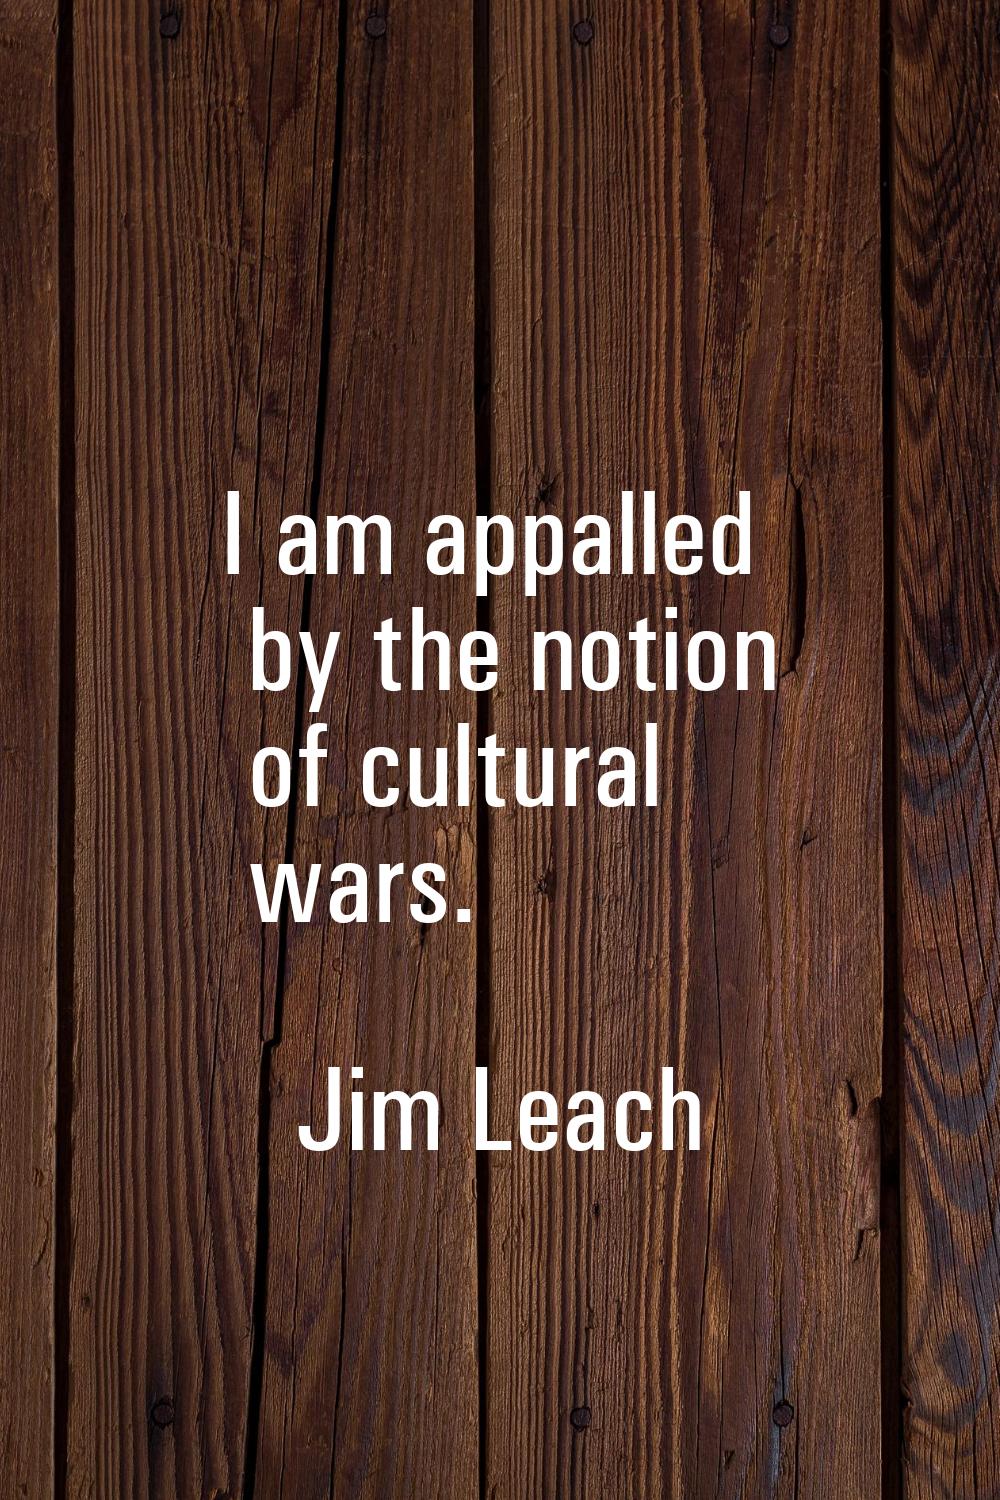 I am appalled by the notion of cultural wars.